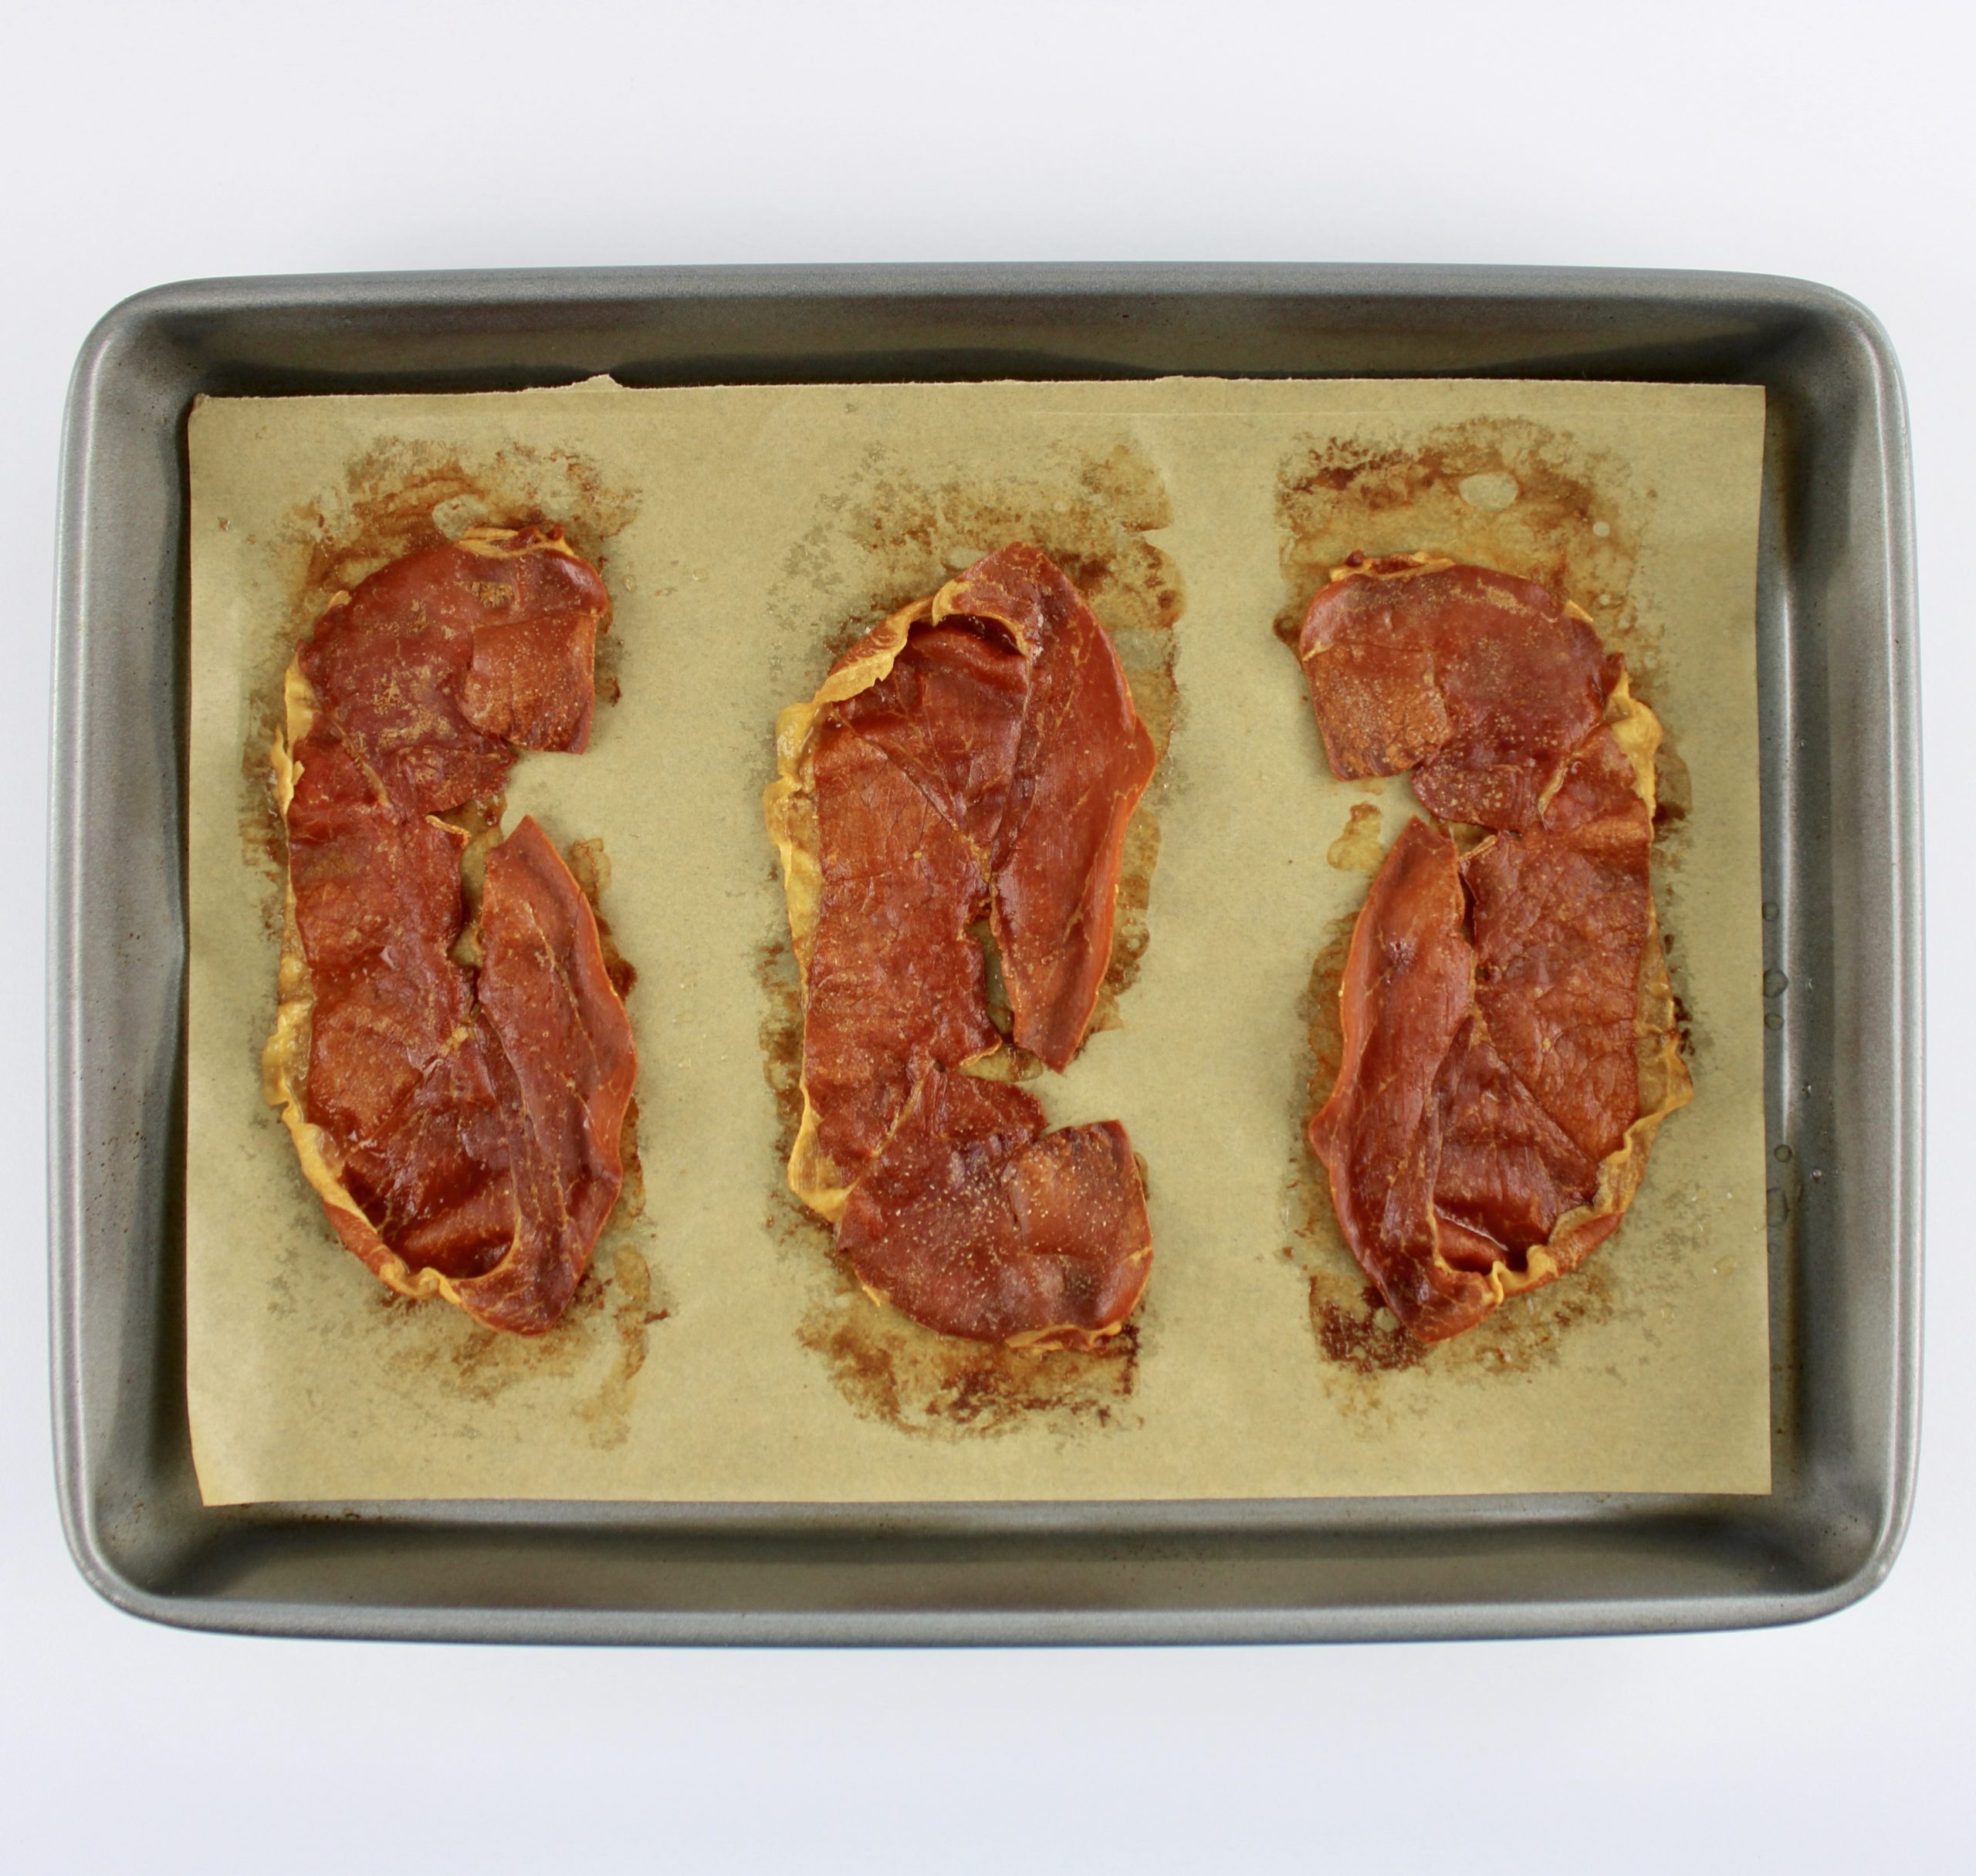 3 slices of crispy prosciutto on baking sheet with parchment paper